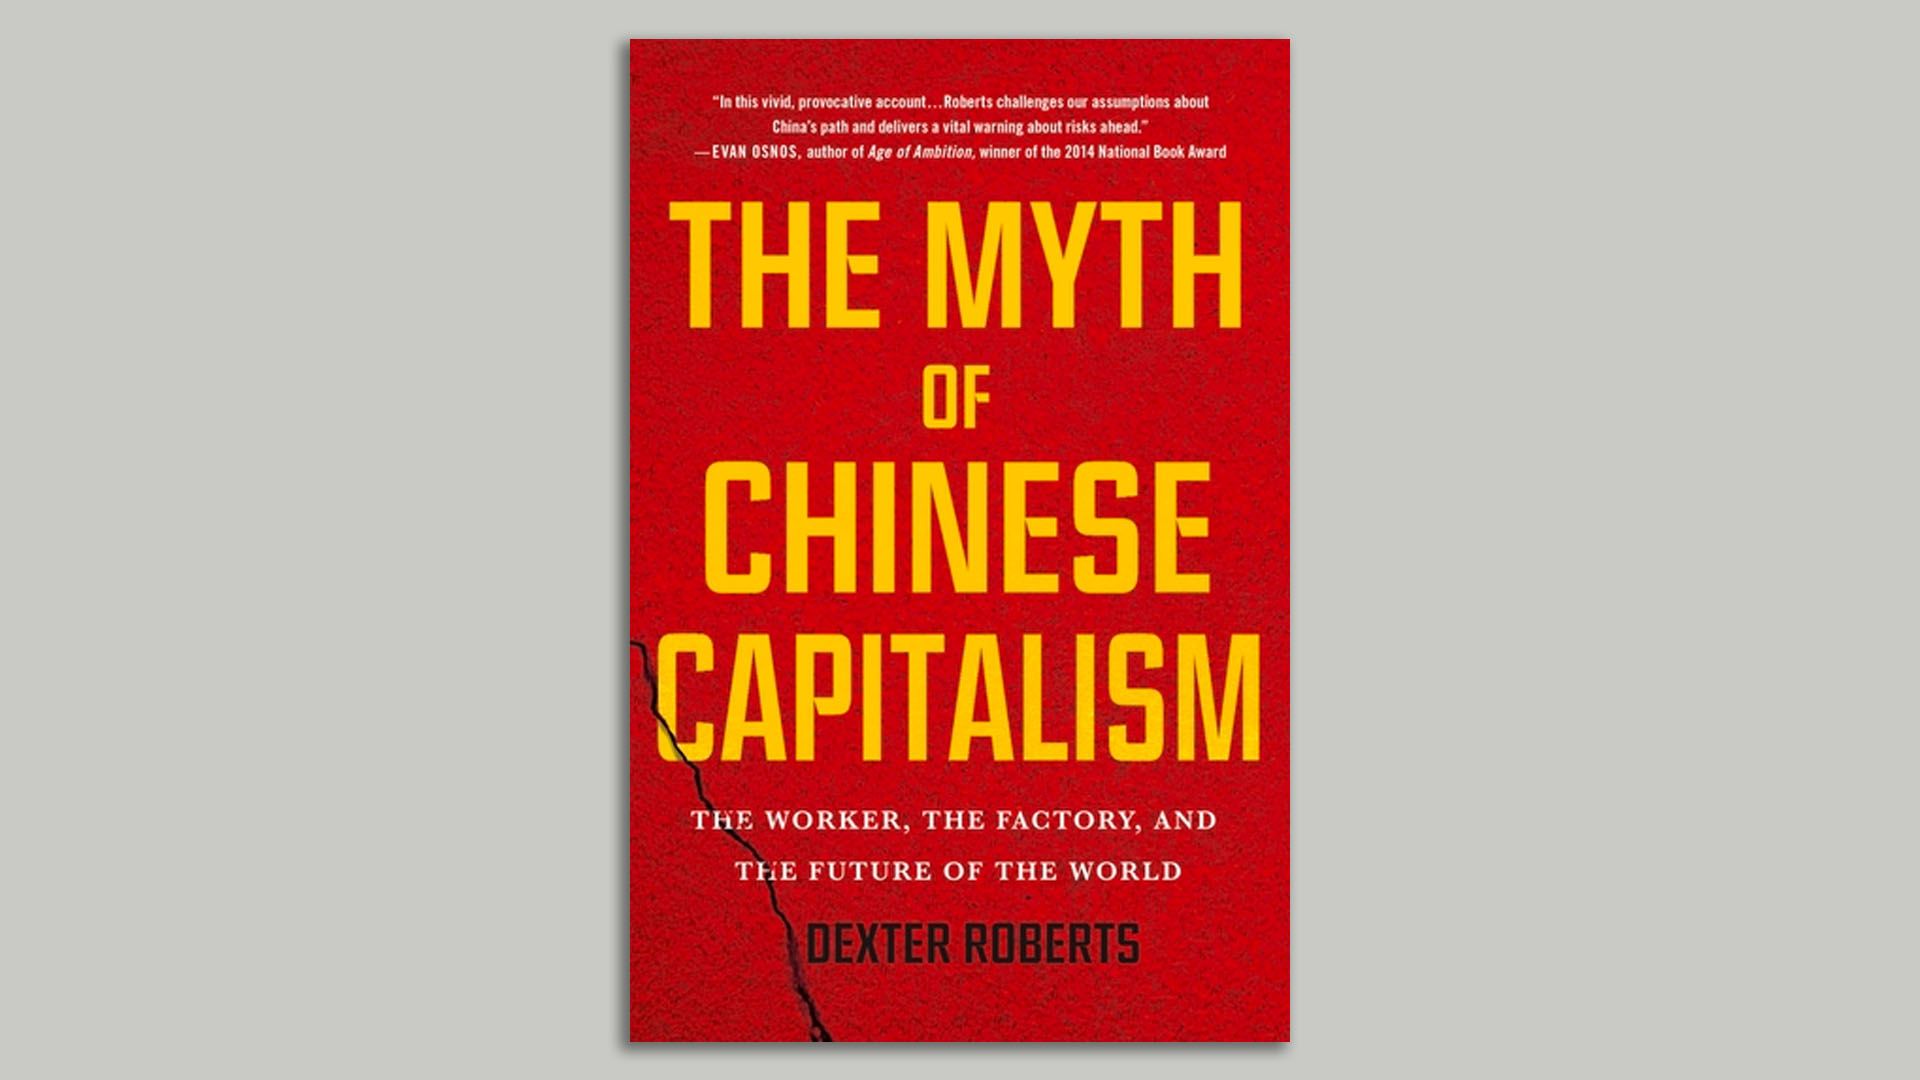 The front cover of the book "The Myth of Chinese Capitalism" by Dexter Roberts.